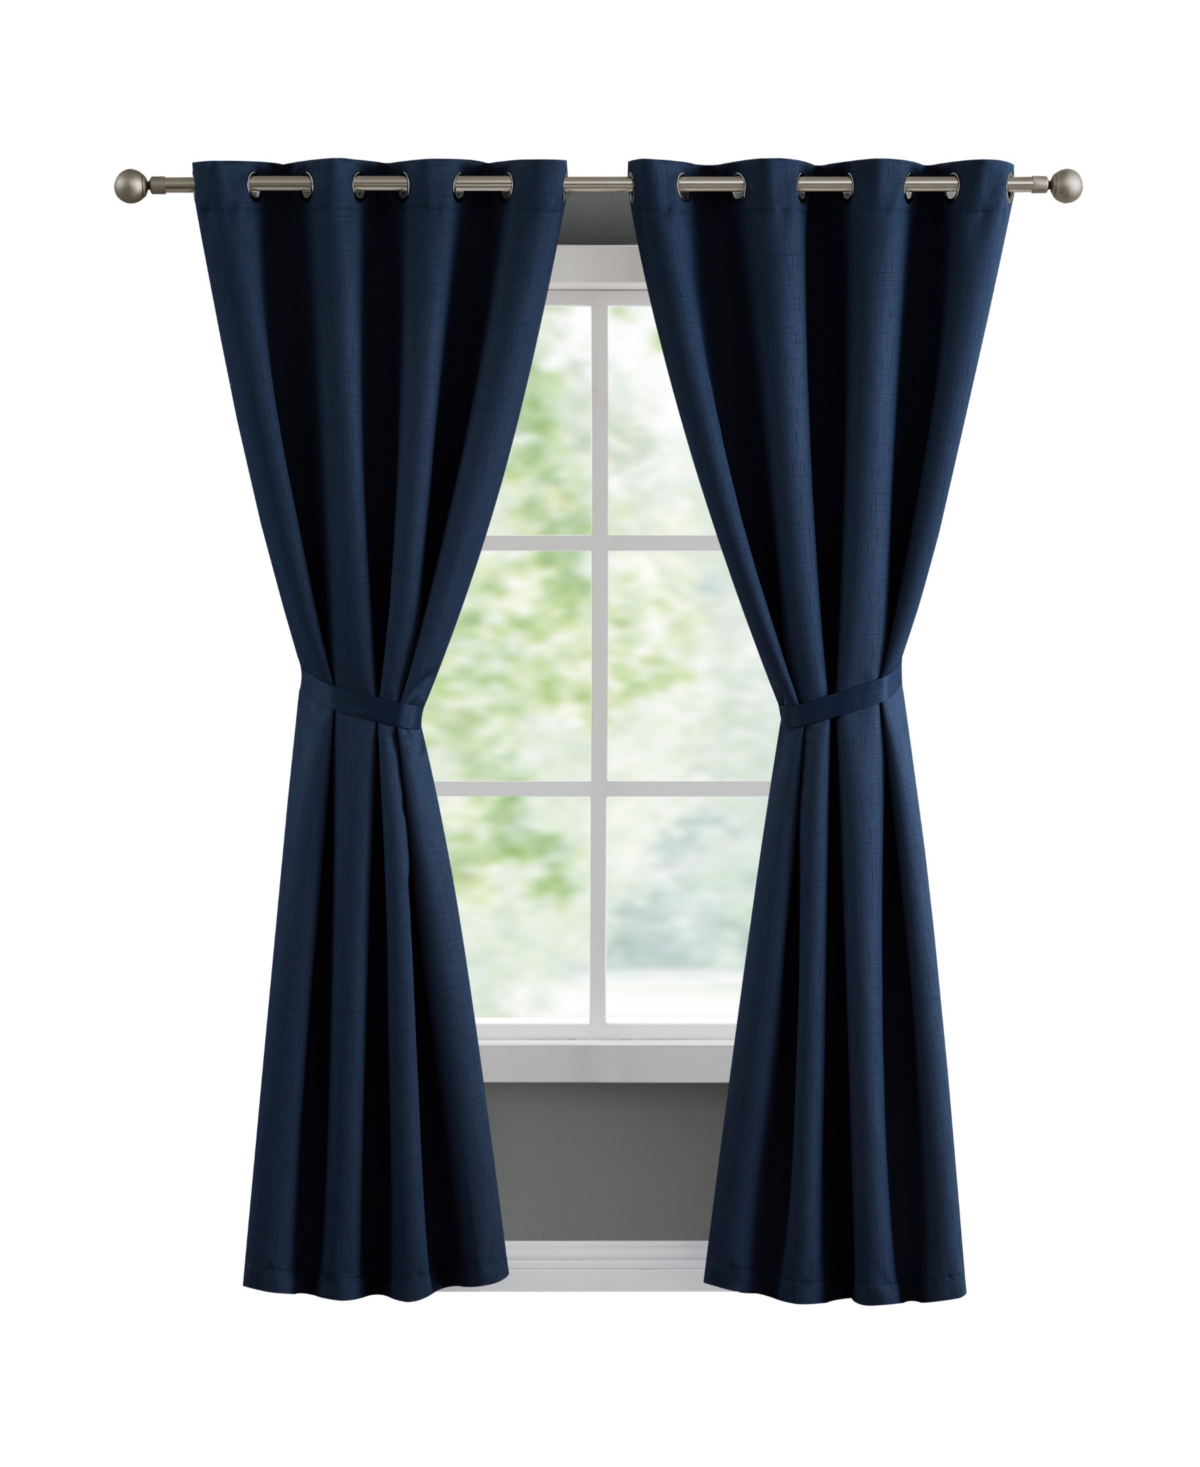 French Connection Ebony Thermal Woven Room Darkening Grommet Window Curtain Panel Pair With Tiebacks, 50" X 96" In Indigo